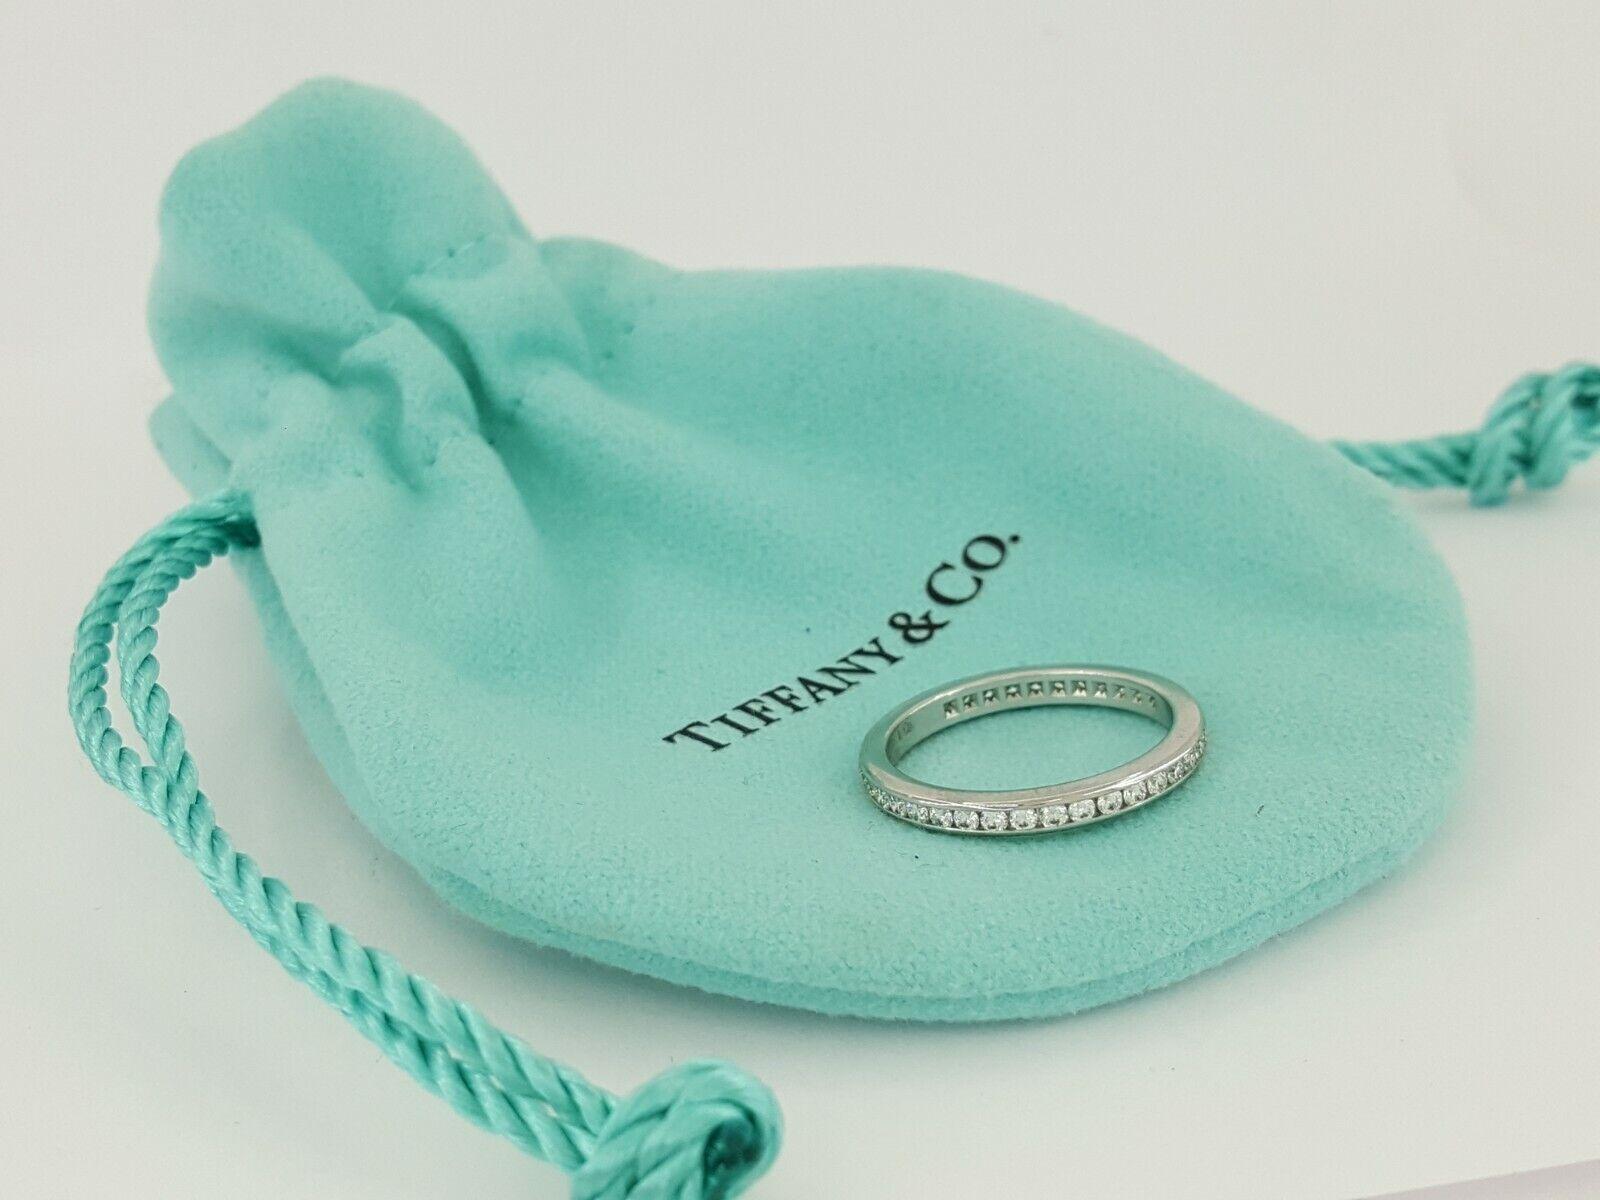 Experience the timeless elegance of this stunning Tiffany & Co. eternity band ring, a symbol of everlasting love and commitment. Crafted with precision in solid platinum, this exquisite ring features a continuous circle of sparkling diamonds